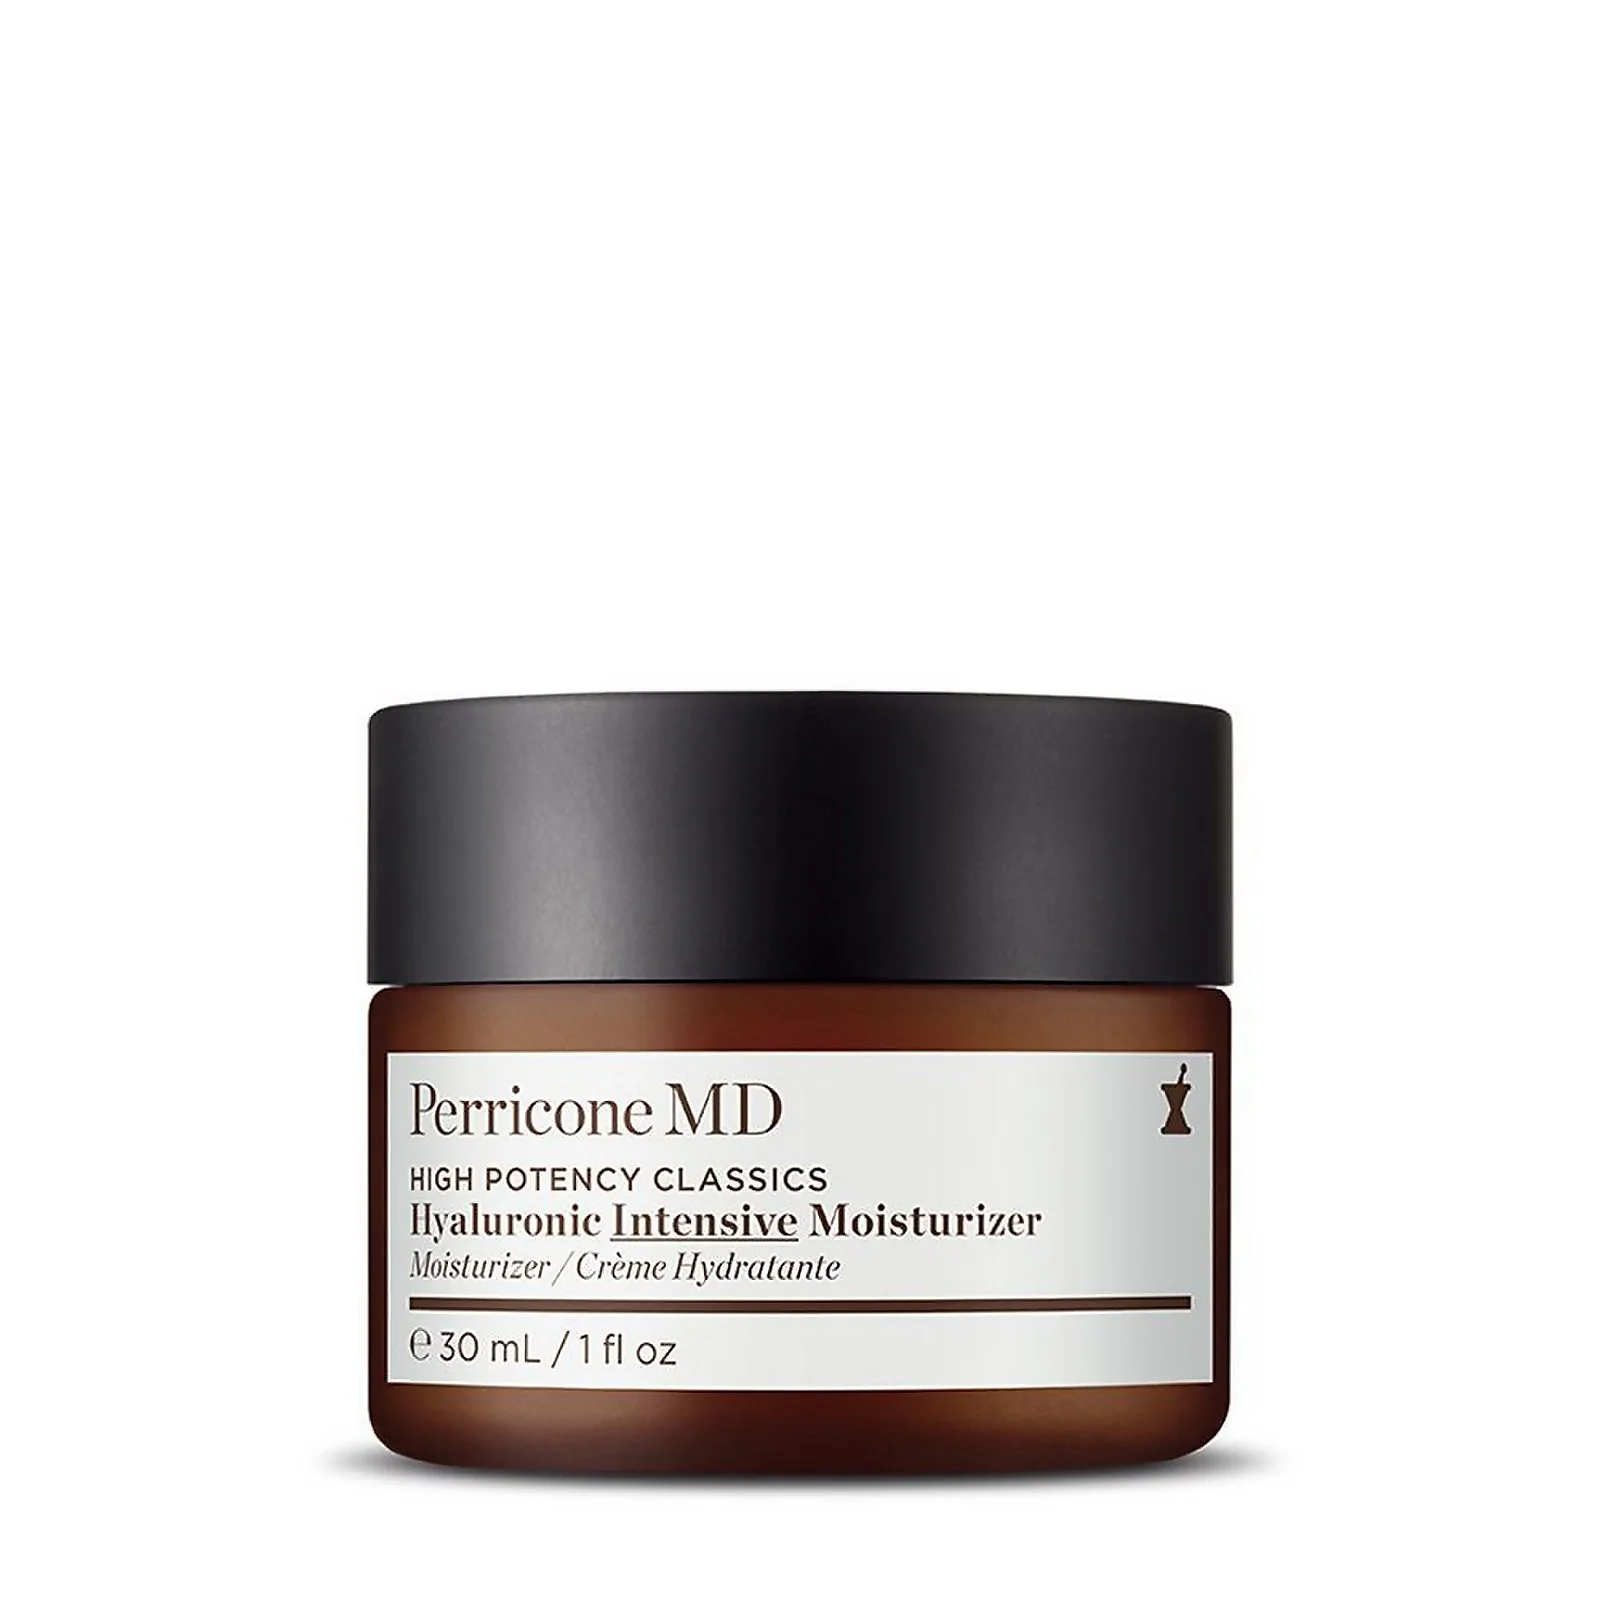 Perricone MD HPC - Hyaluronic Intensive Moisturizer Image 1